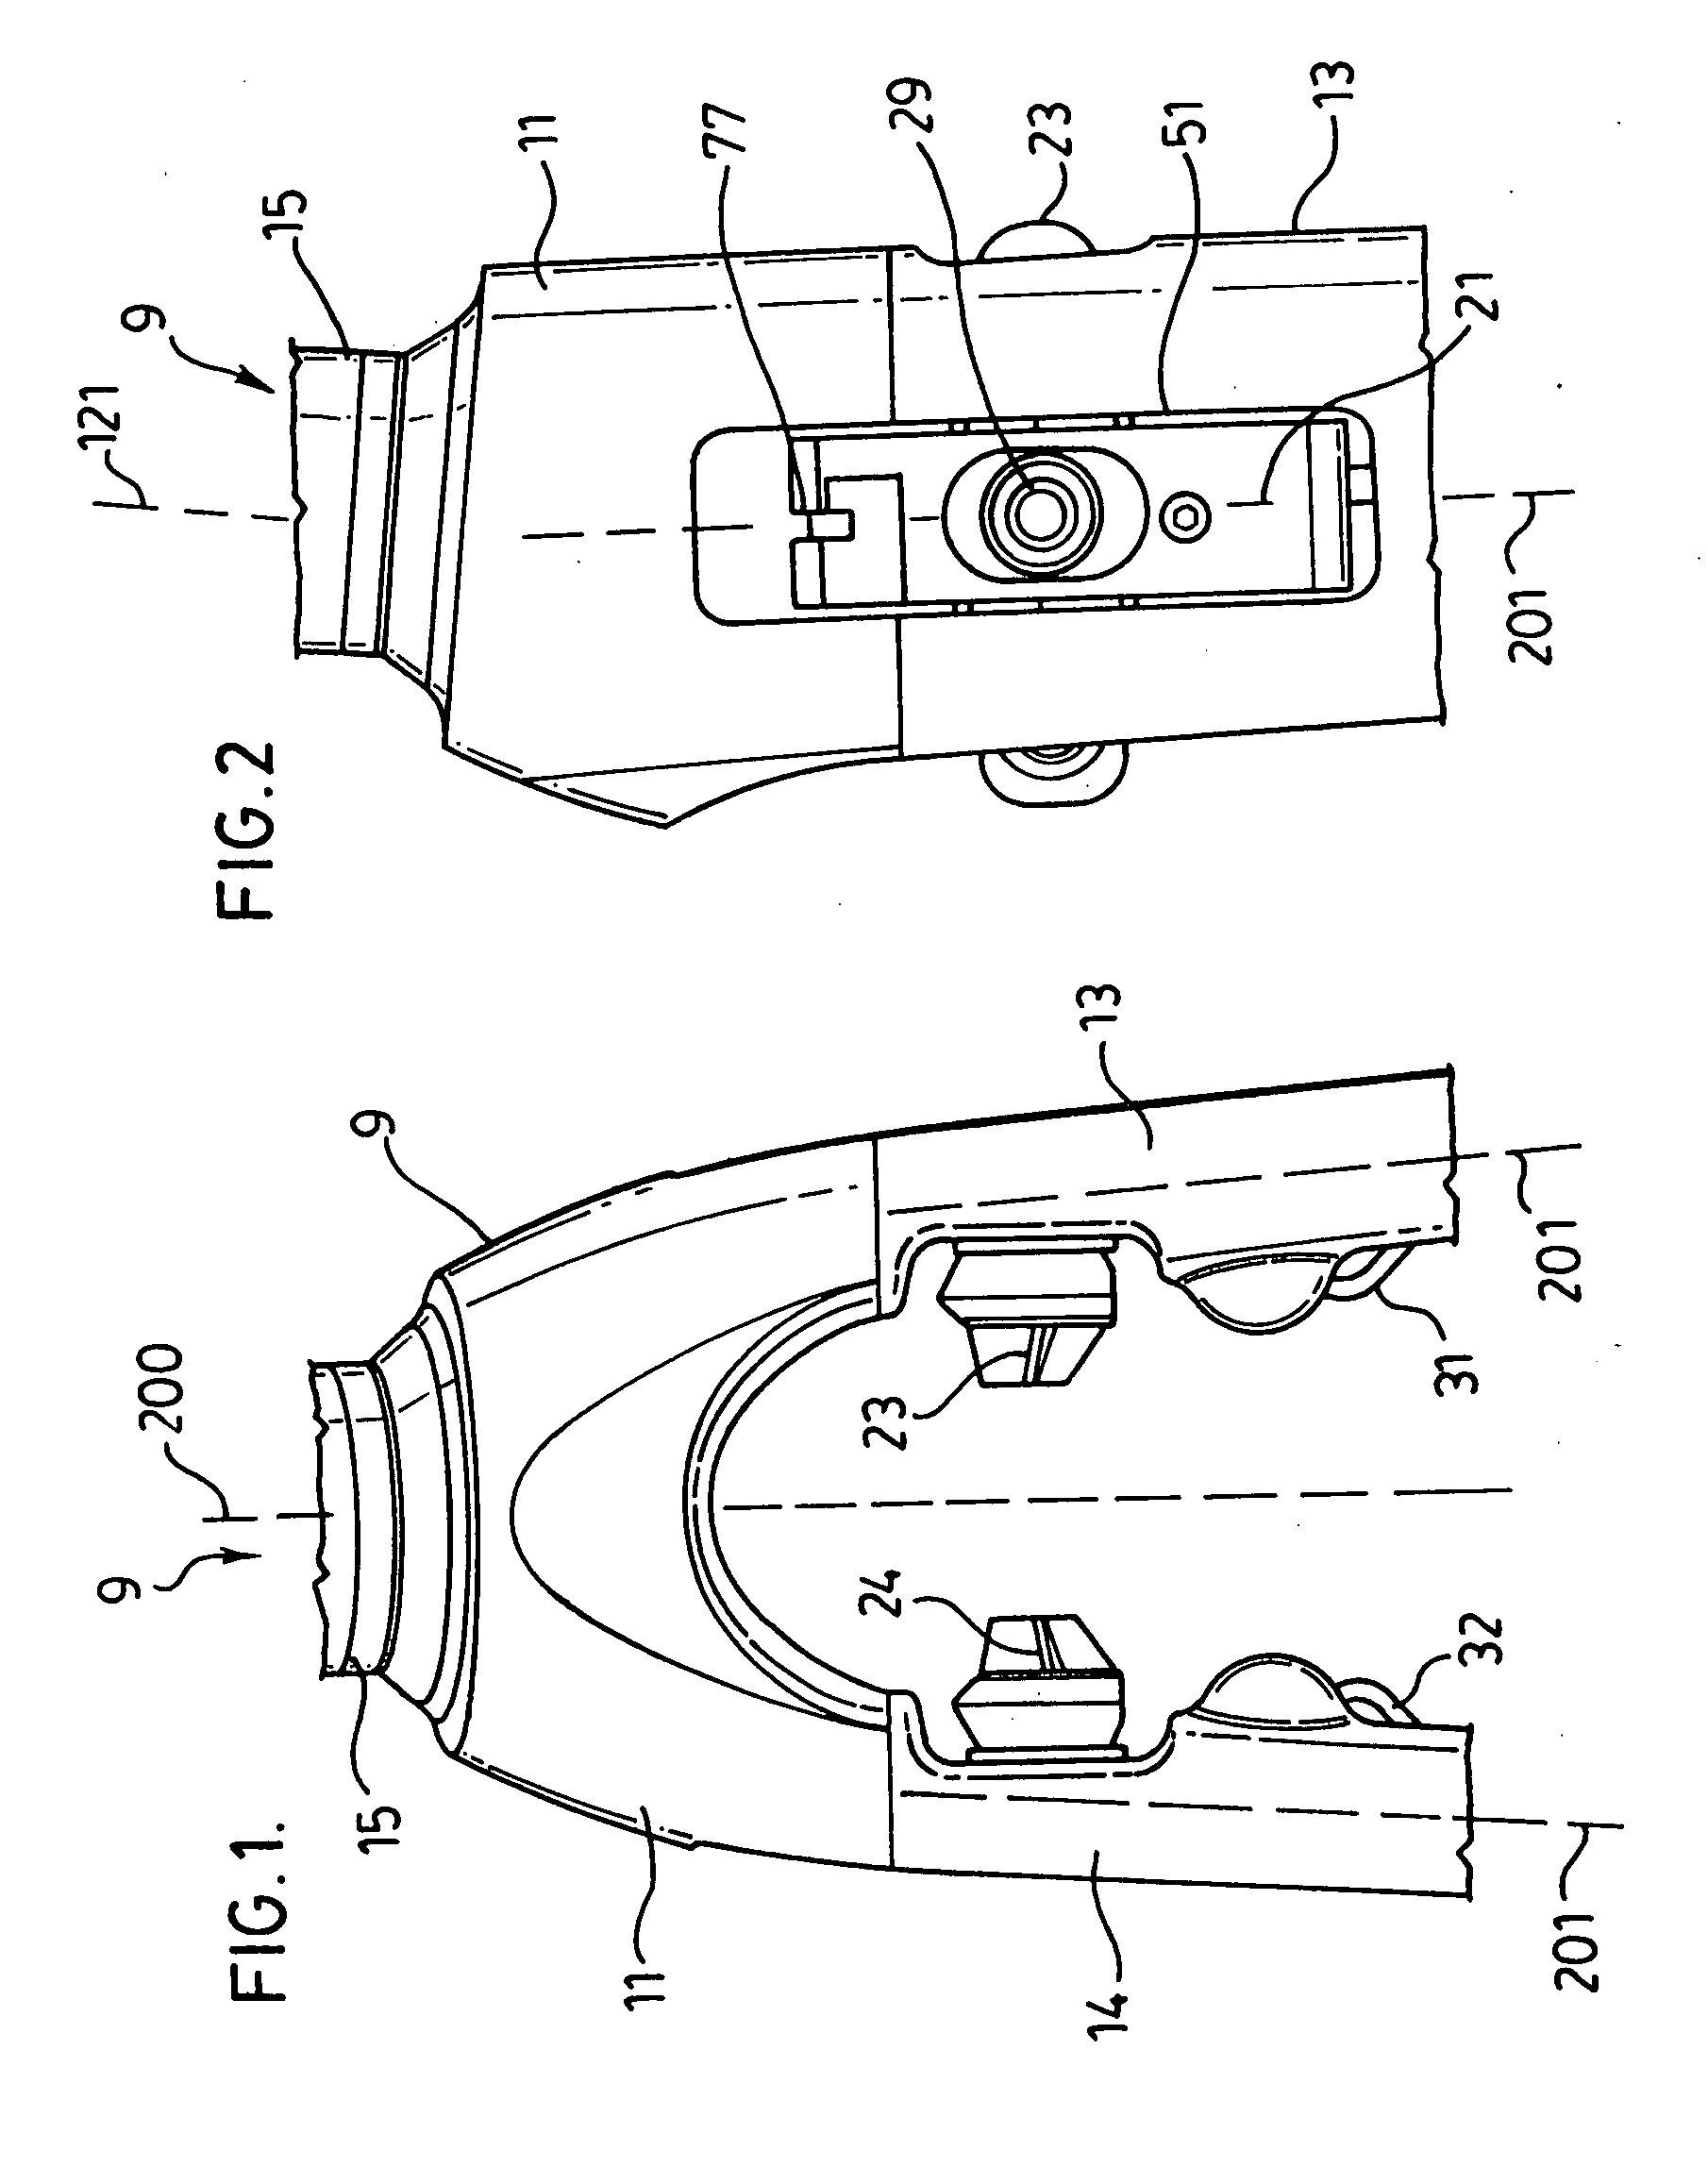 Fork with integrated braking system